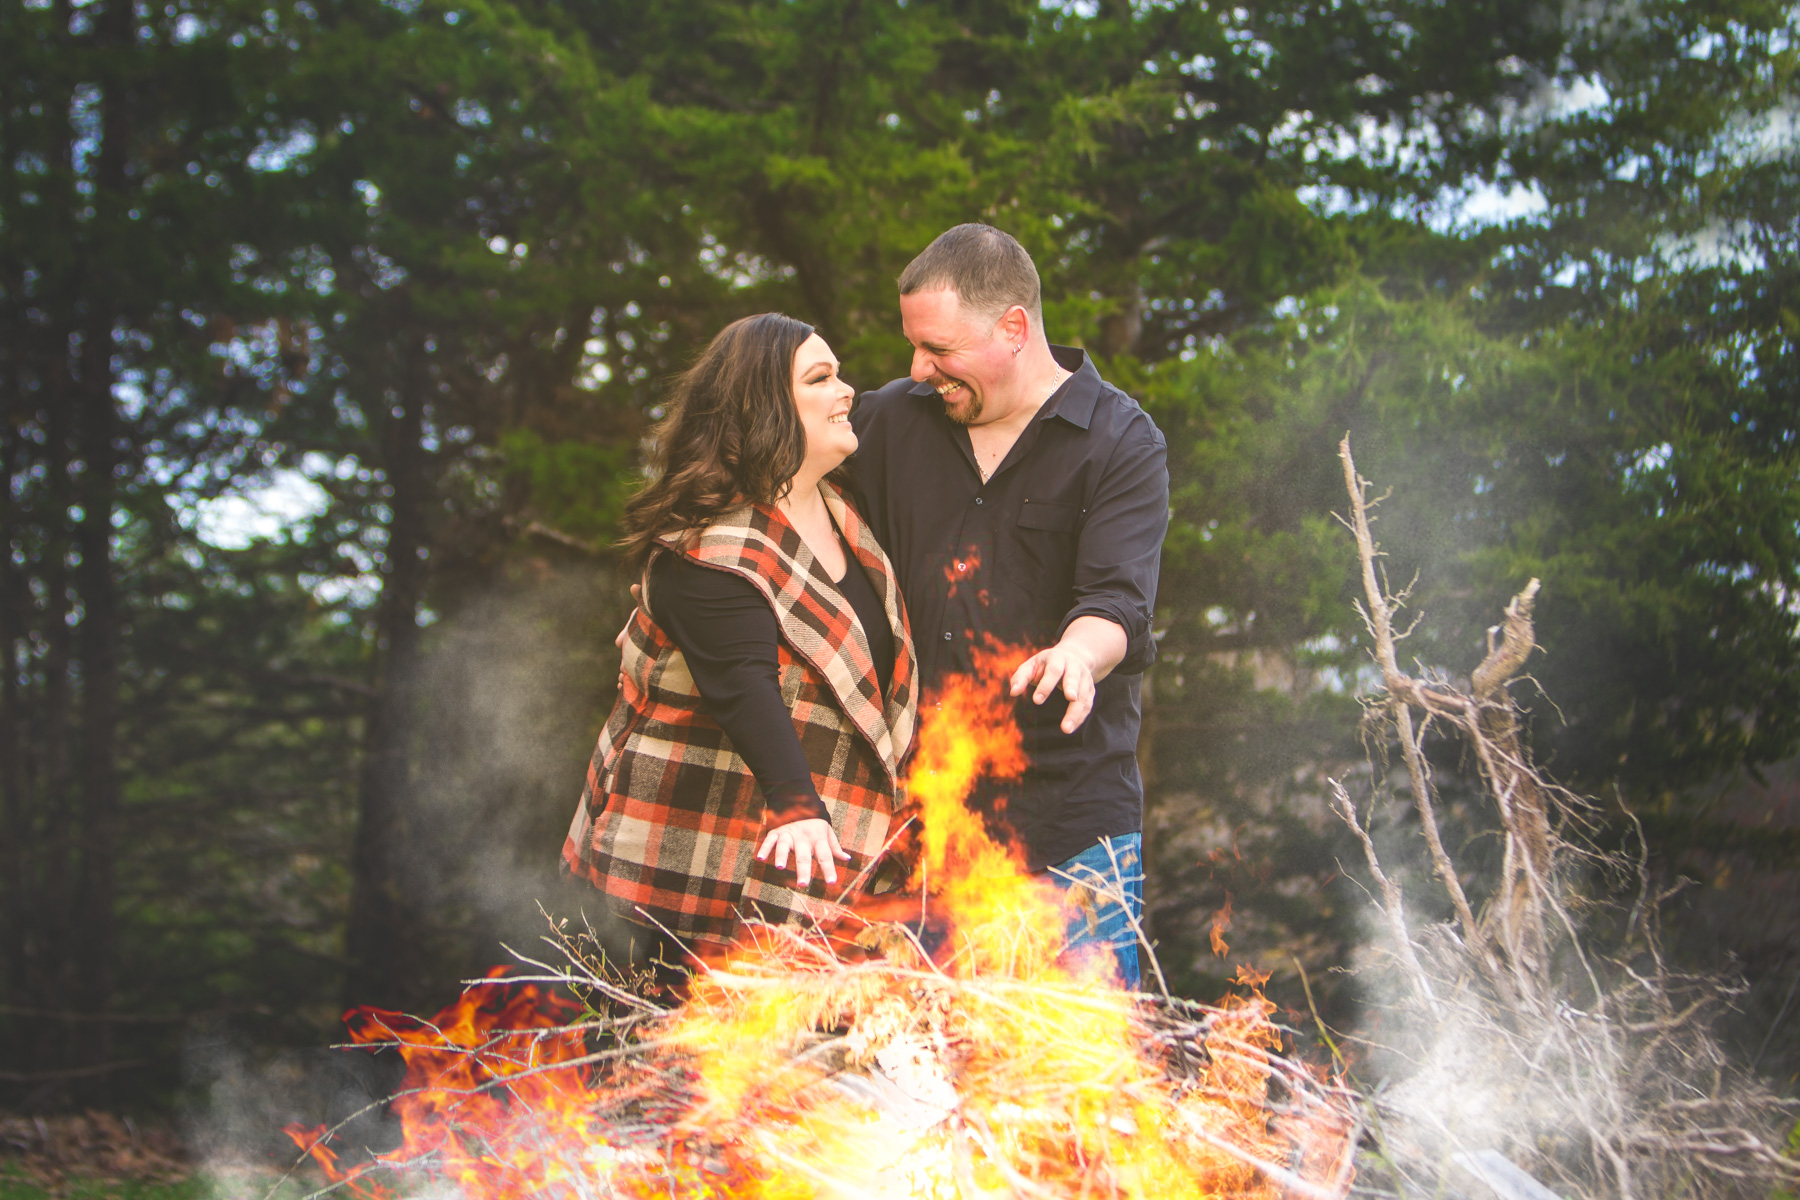 Engagement session in Wantage, New Jersey with Jill and Rich